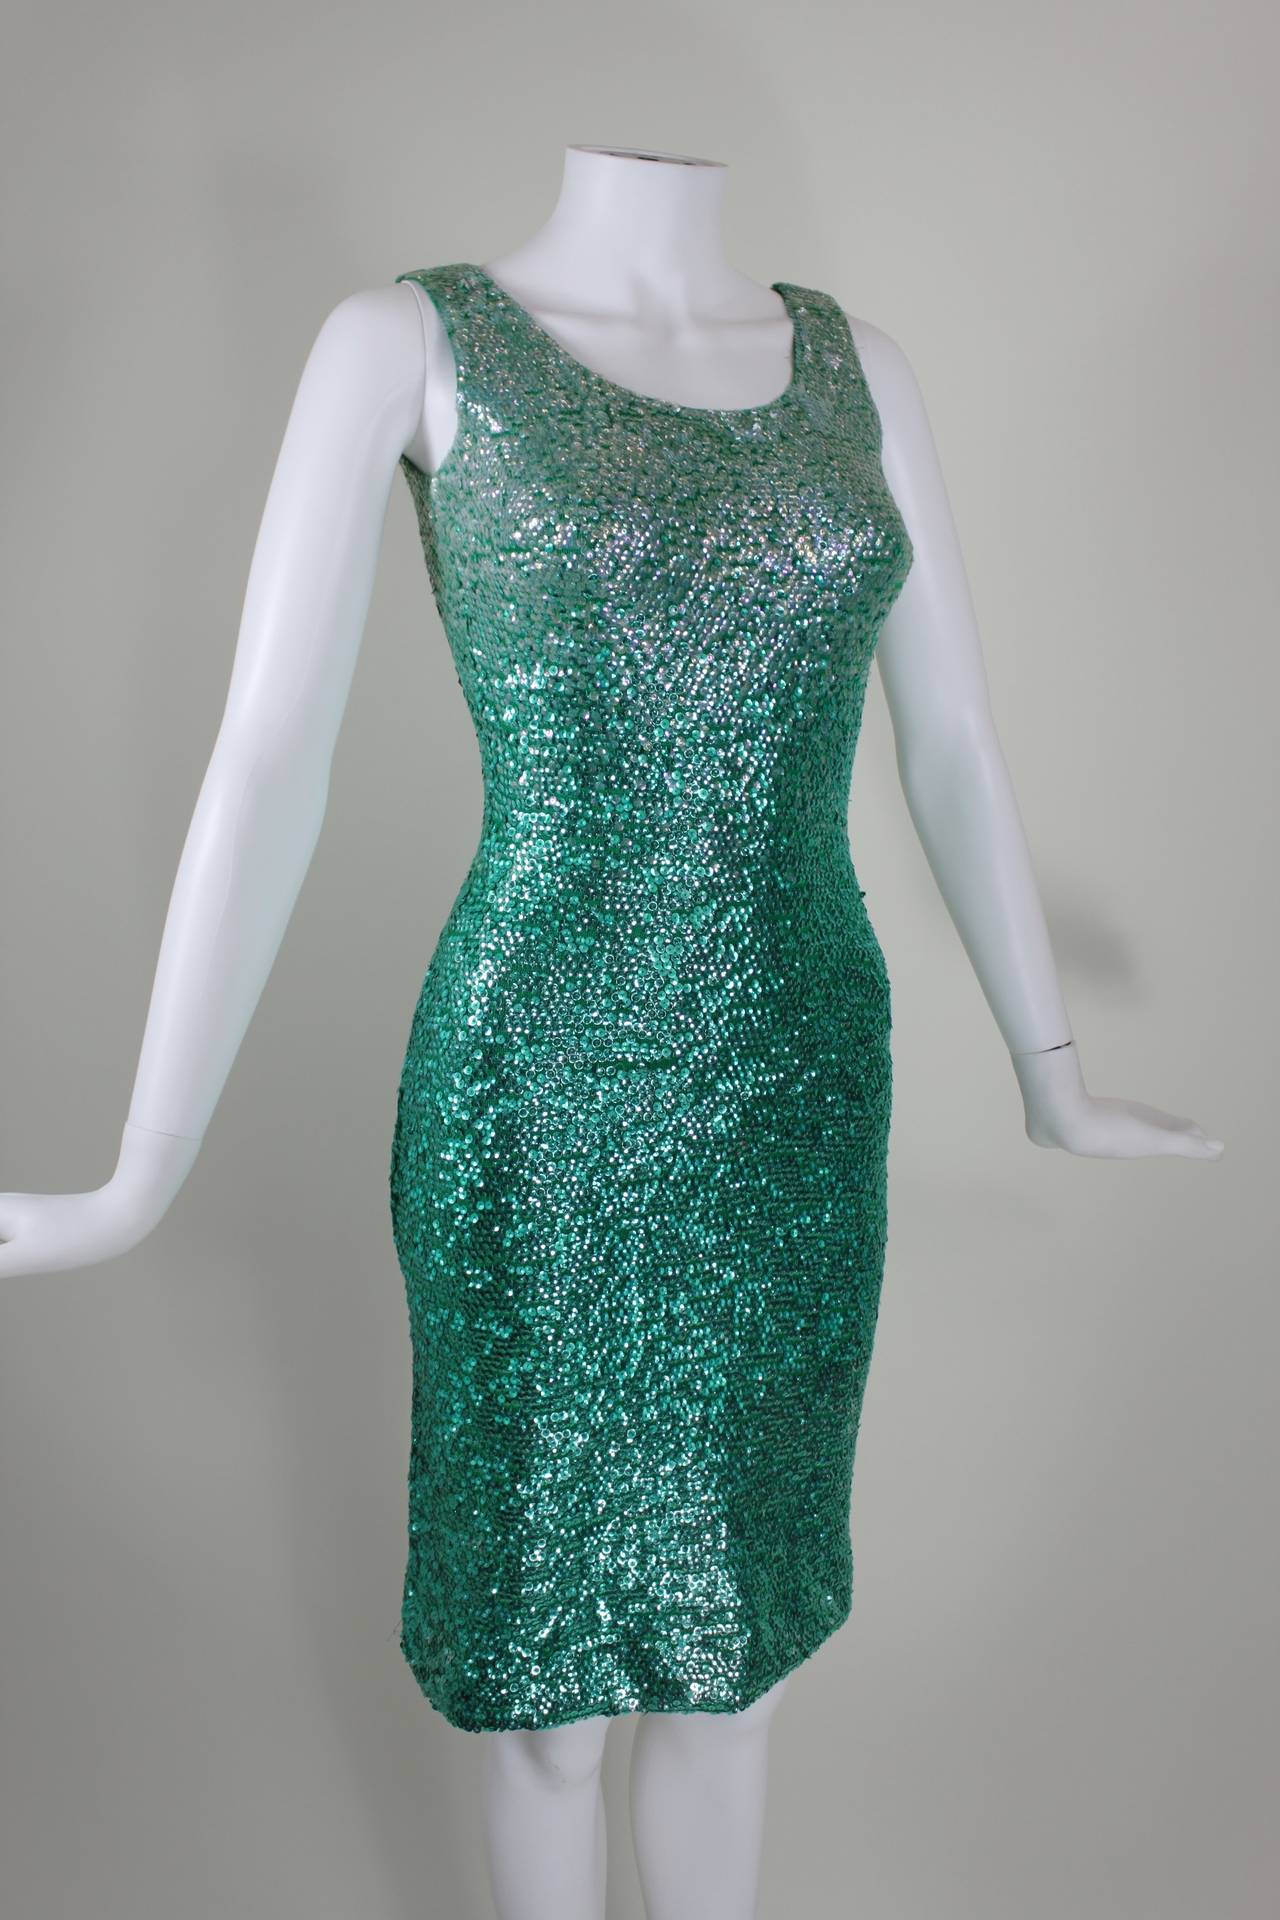 1960s Peacock Green Sequined Knit Dress 5